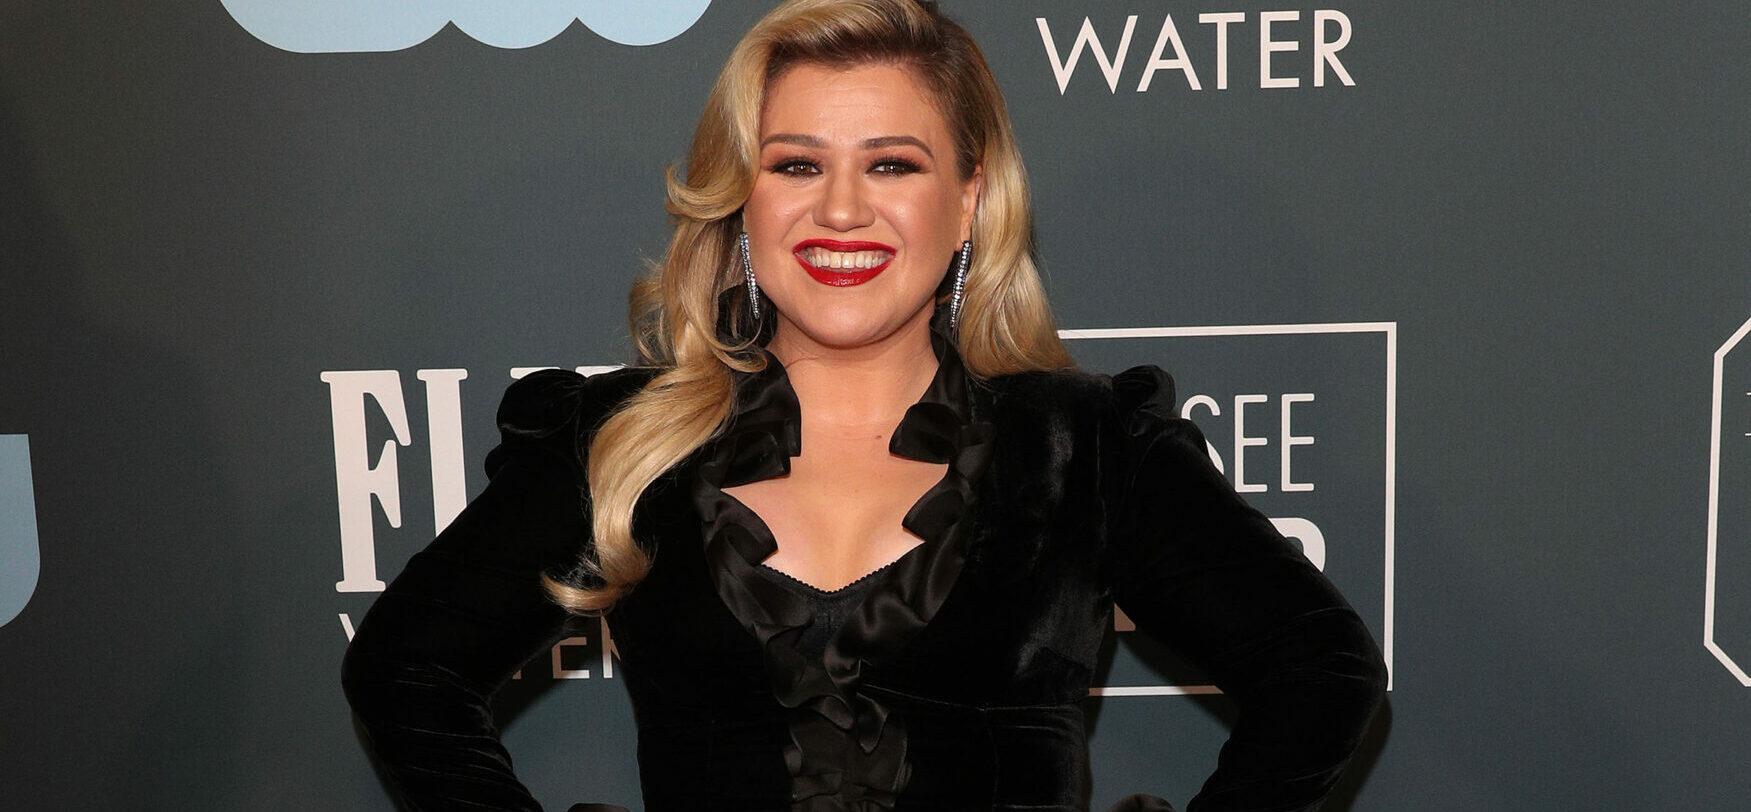 Kelly Clarkson Files Restraining Order Against 'Large, Imposing' Man Who Showed Up In Semi-Truck